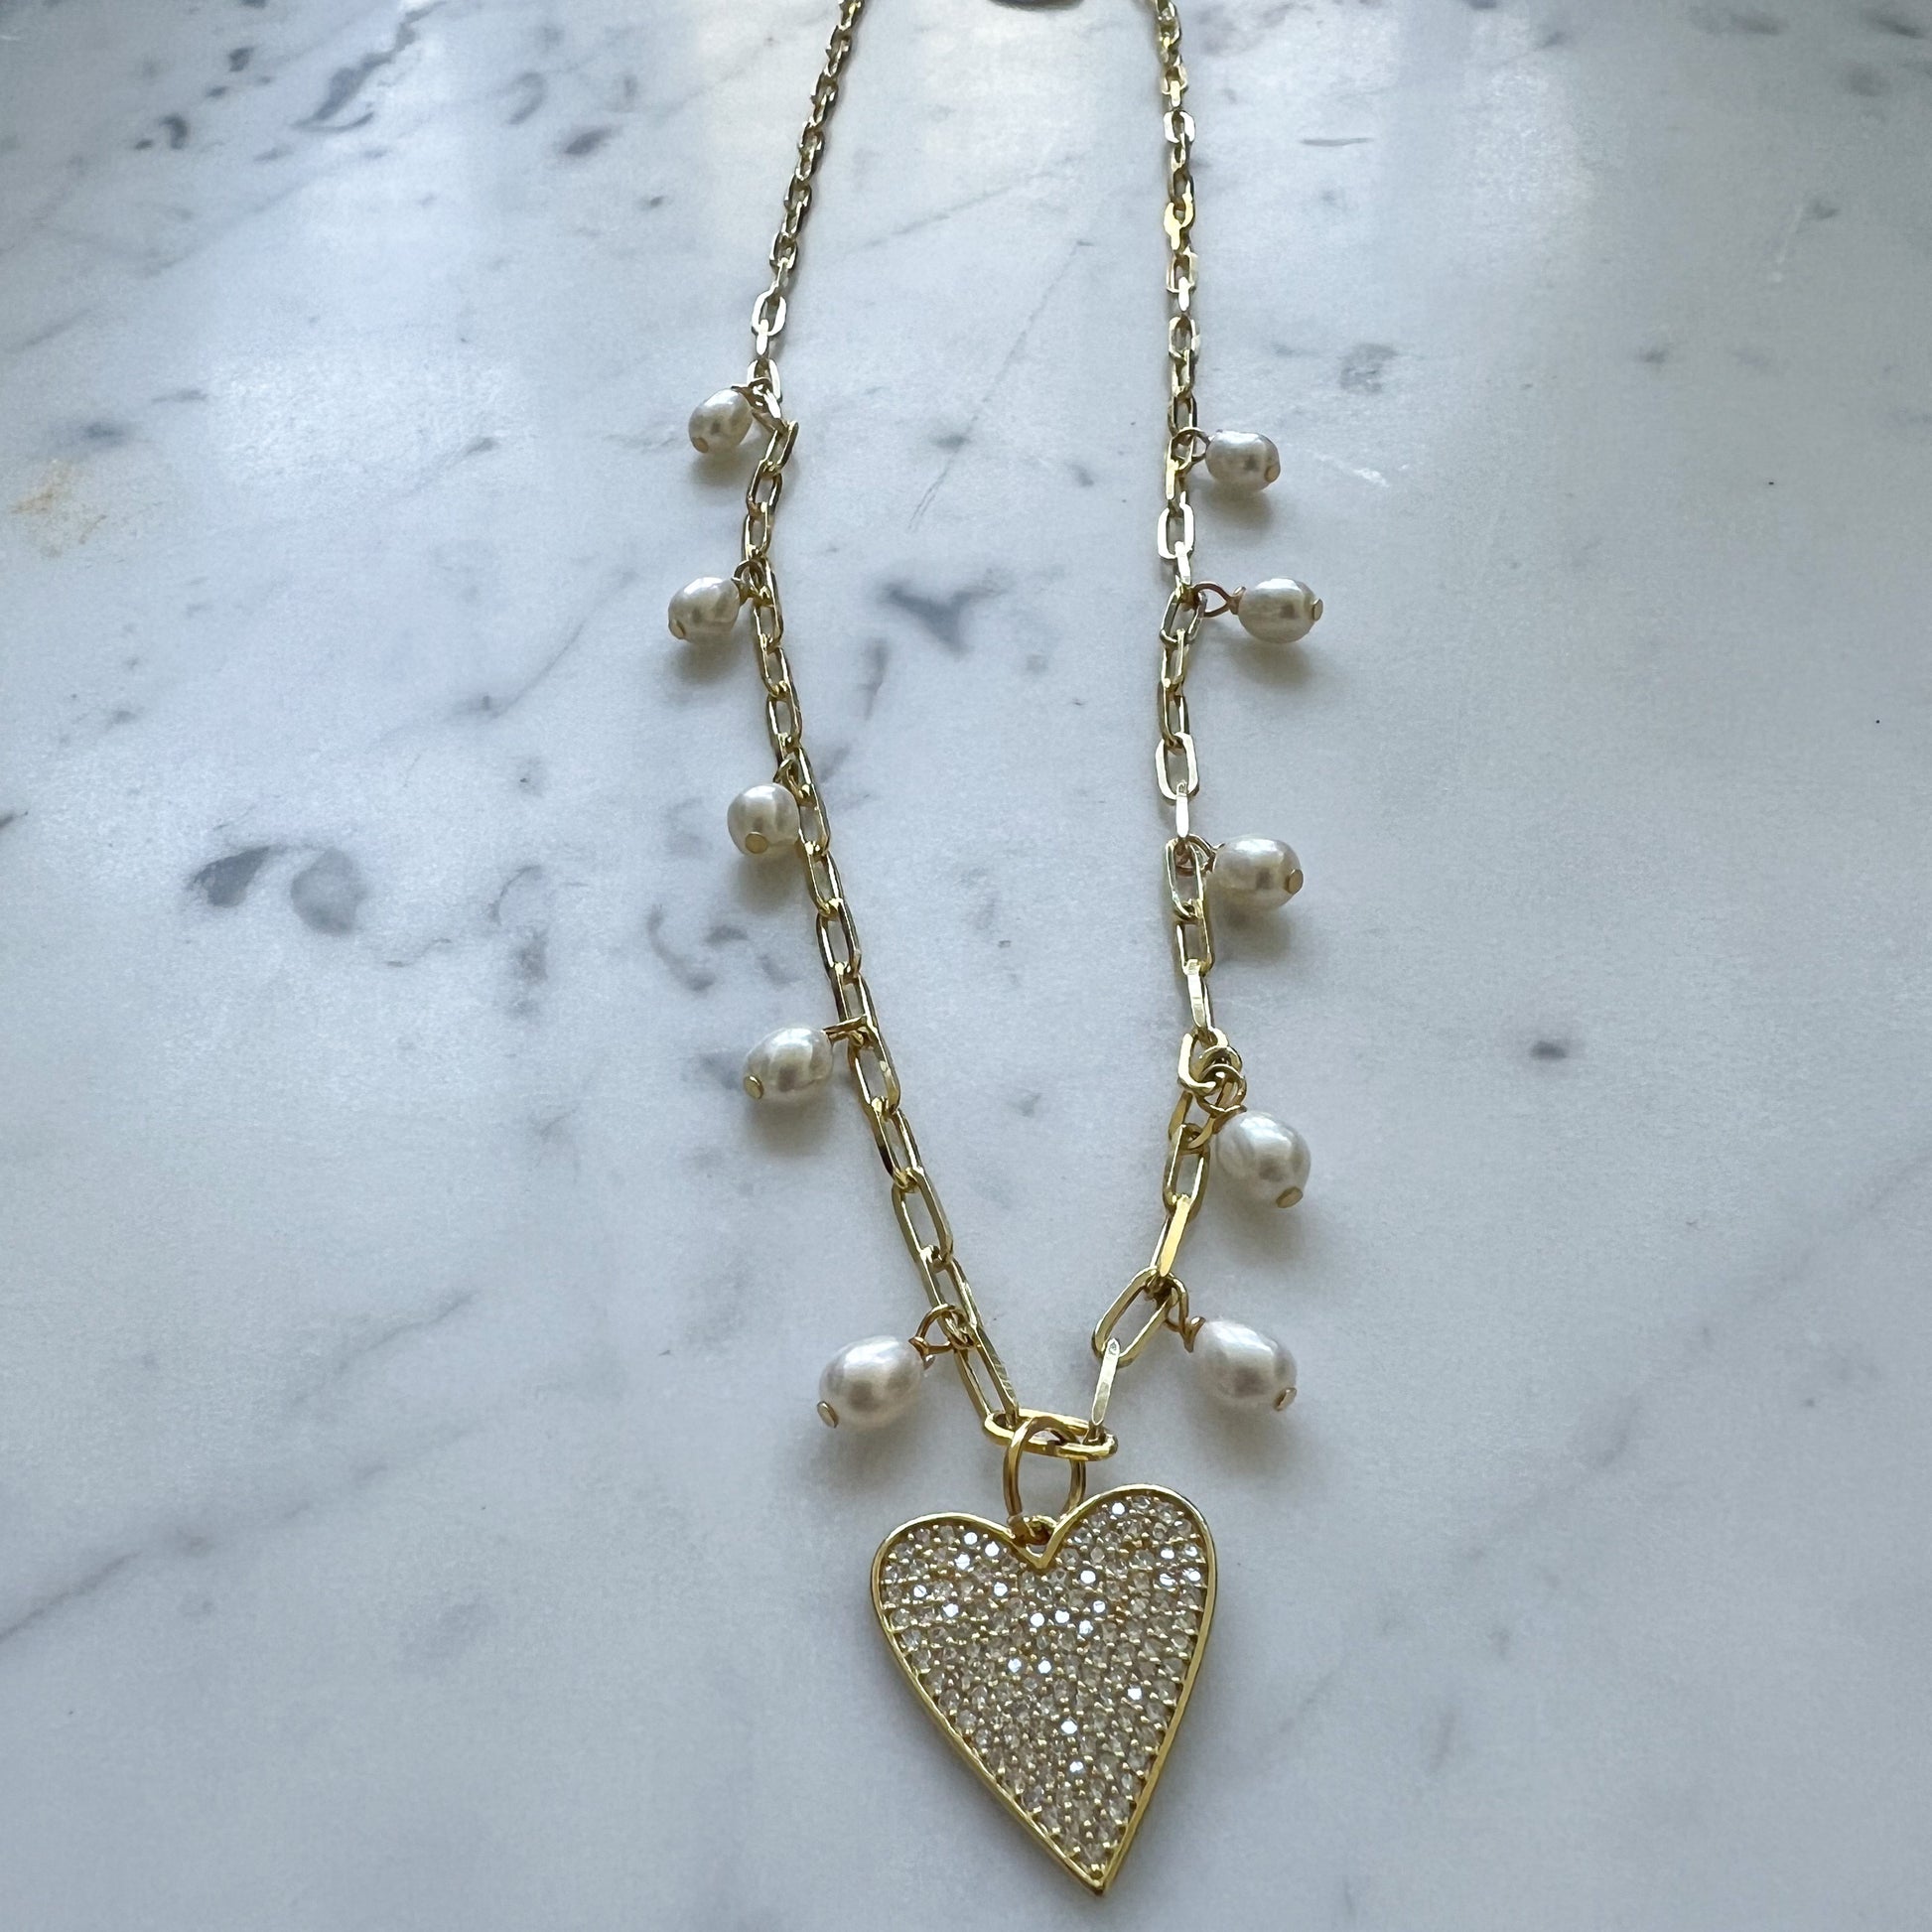 Coeur Pave Heart Freshwater Pearl Gold Charm 925 Necklace - BelleStyle